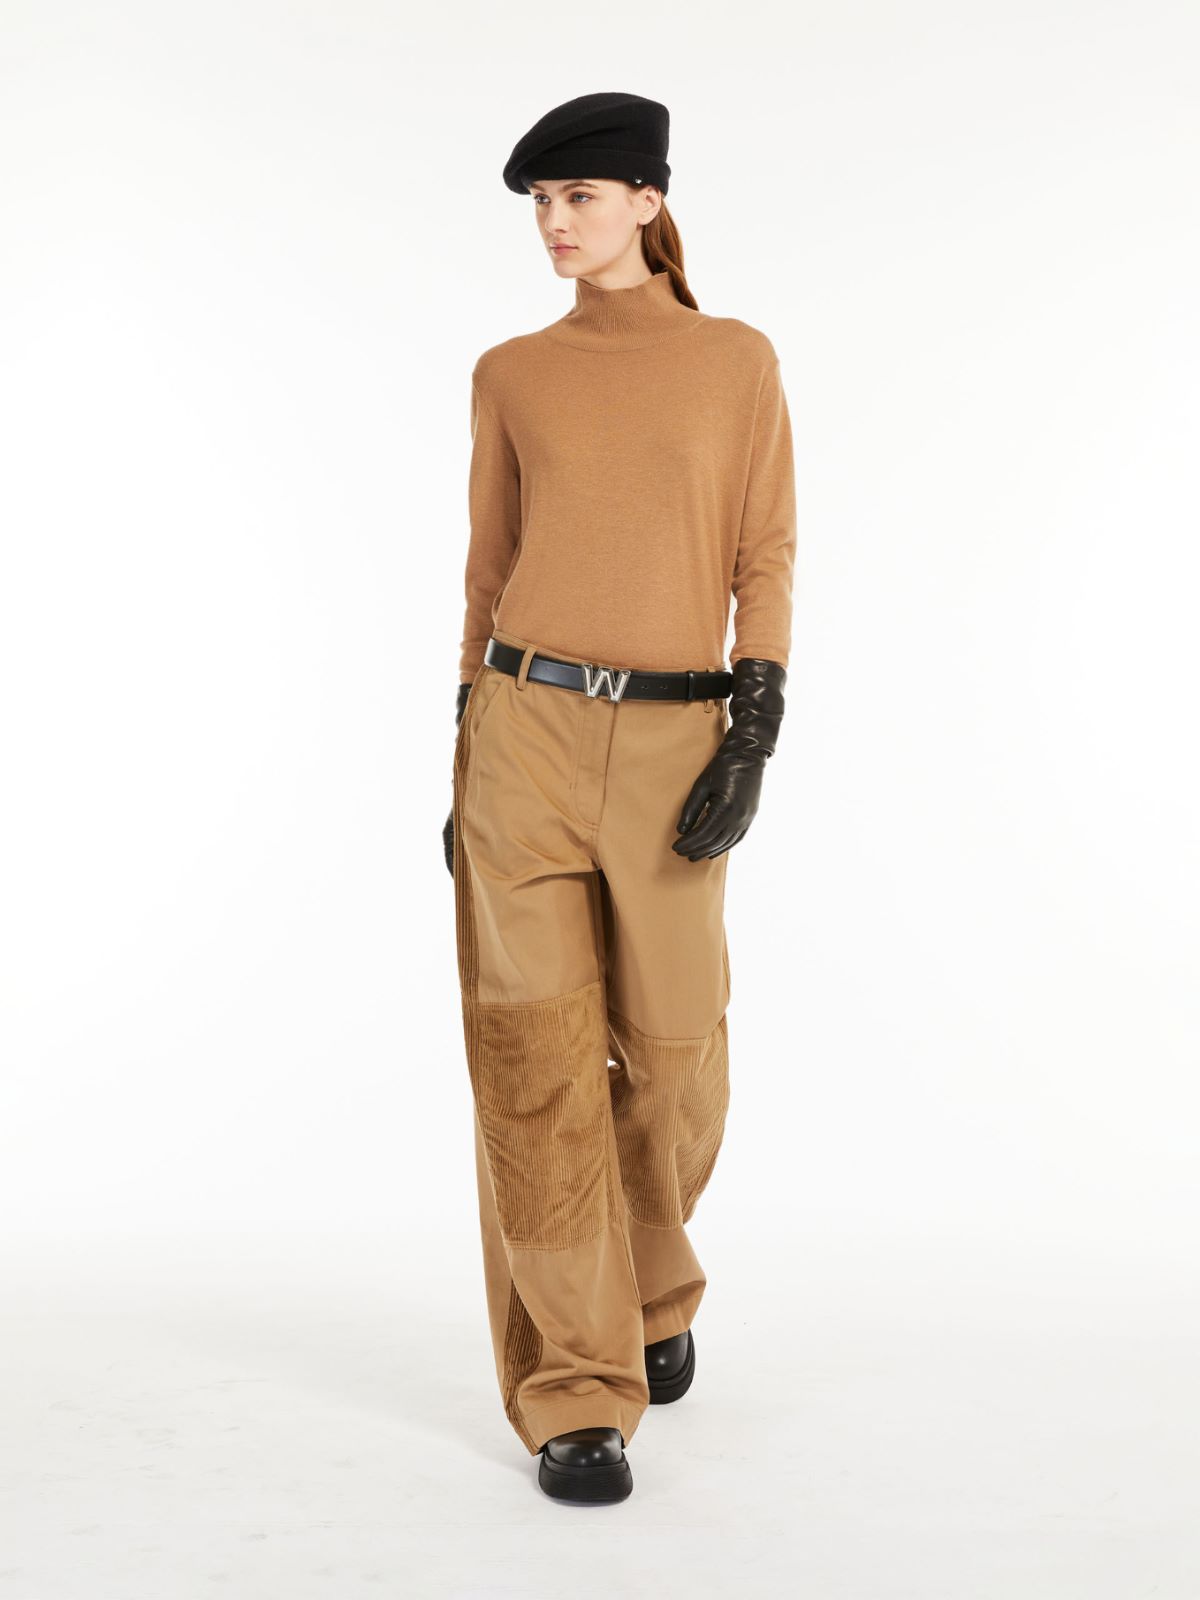 New Look Curves Camel Tailored Wide Leg Trousers | very.co.uk